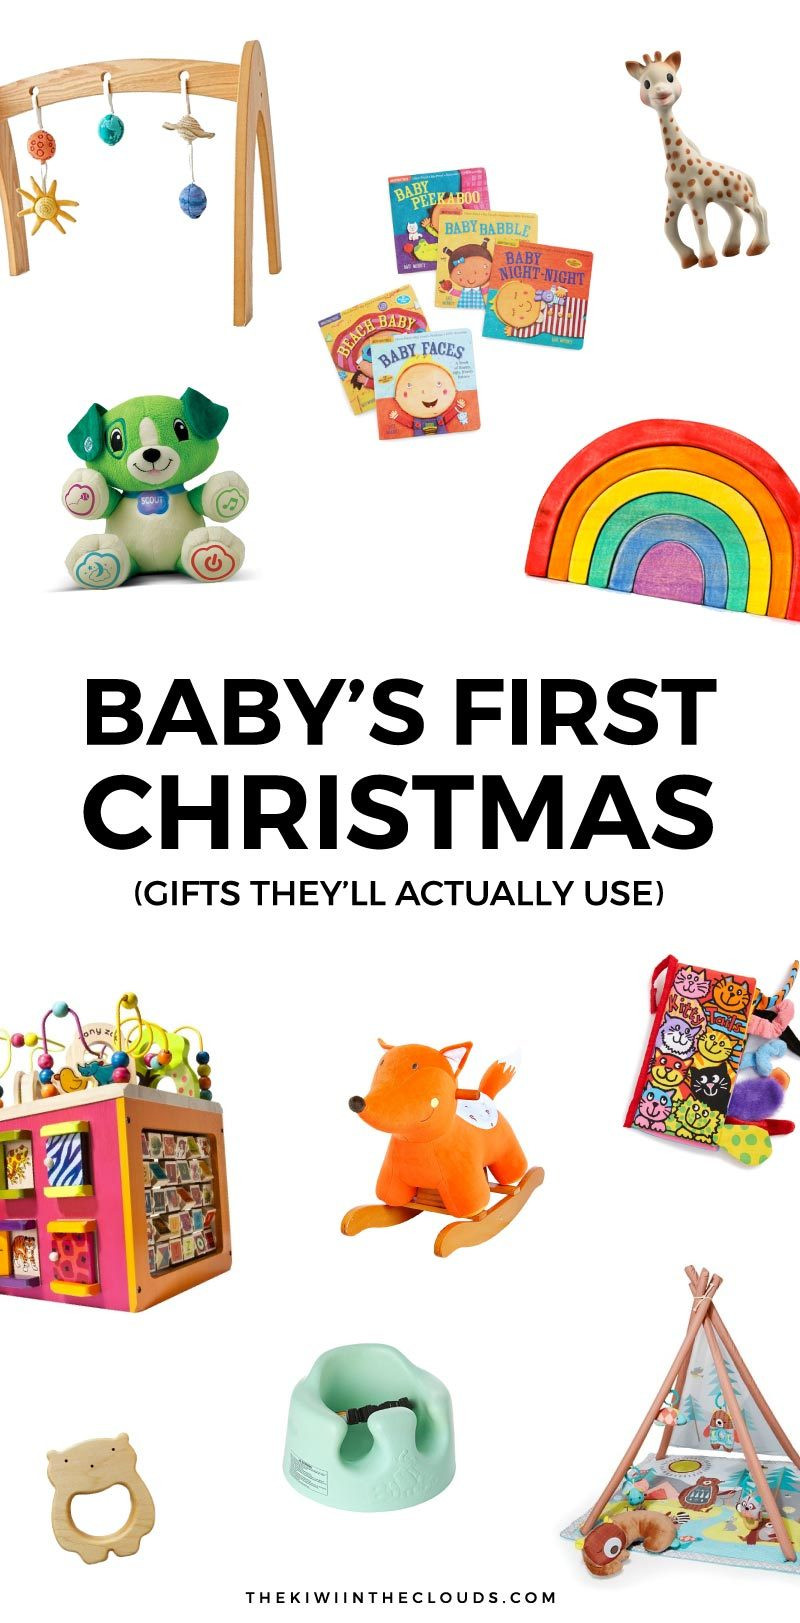 Baby First Christmas Gift Ideas
 11 Baby s First Christmas Gifts That Will Actually Get Used